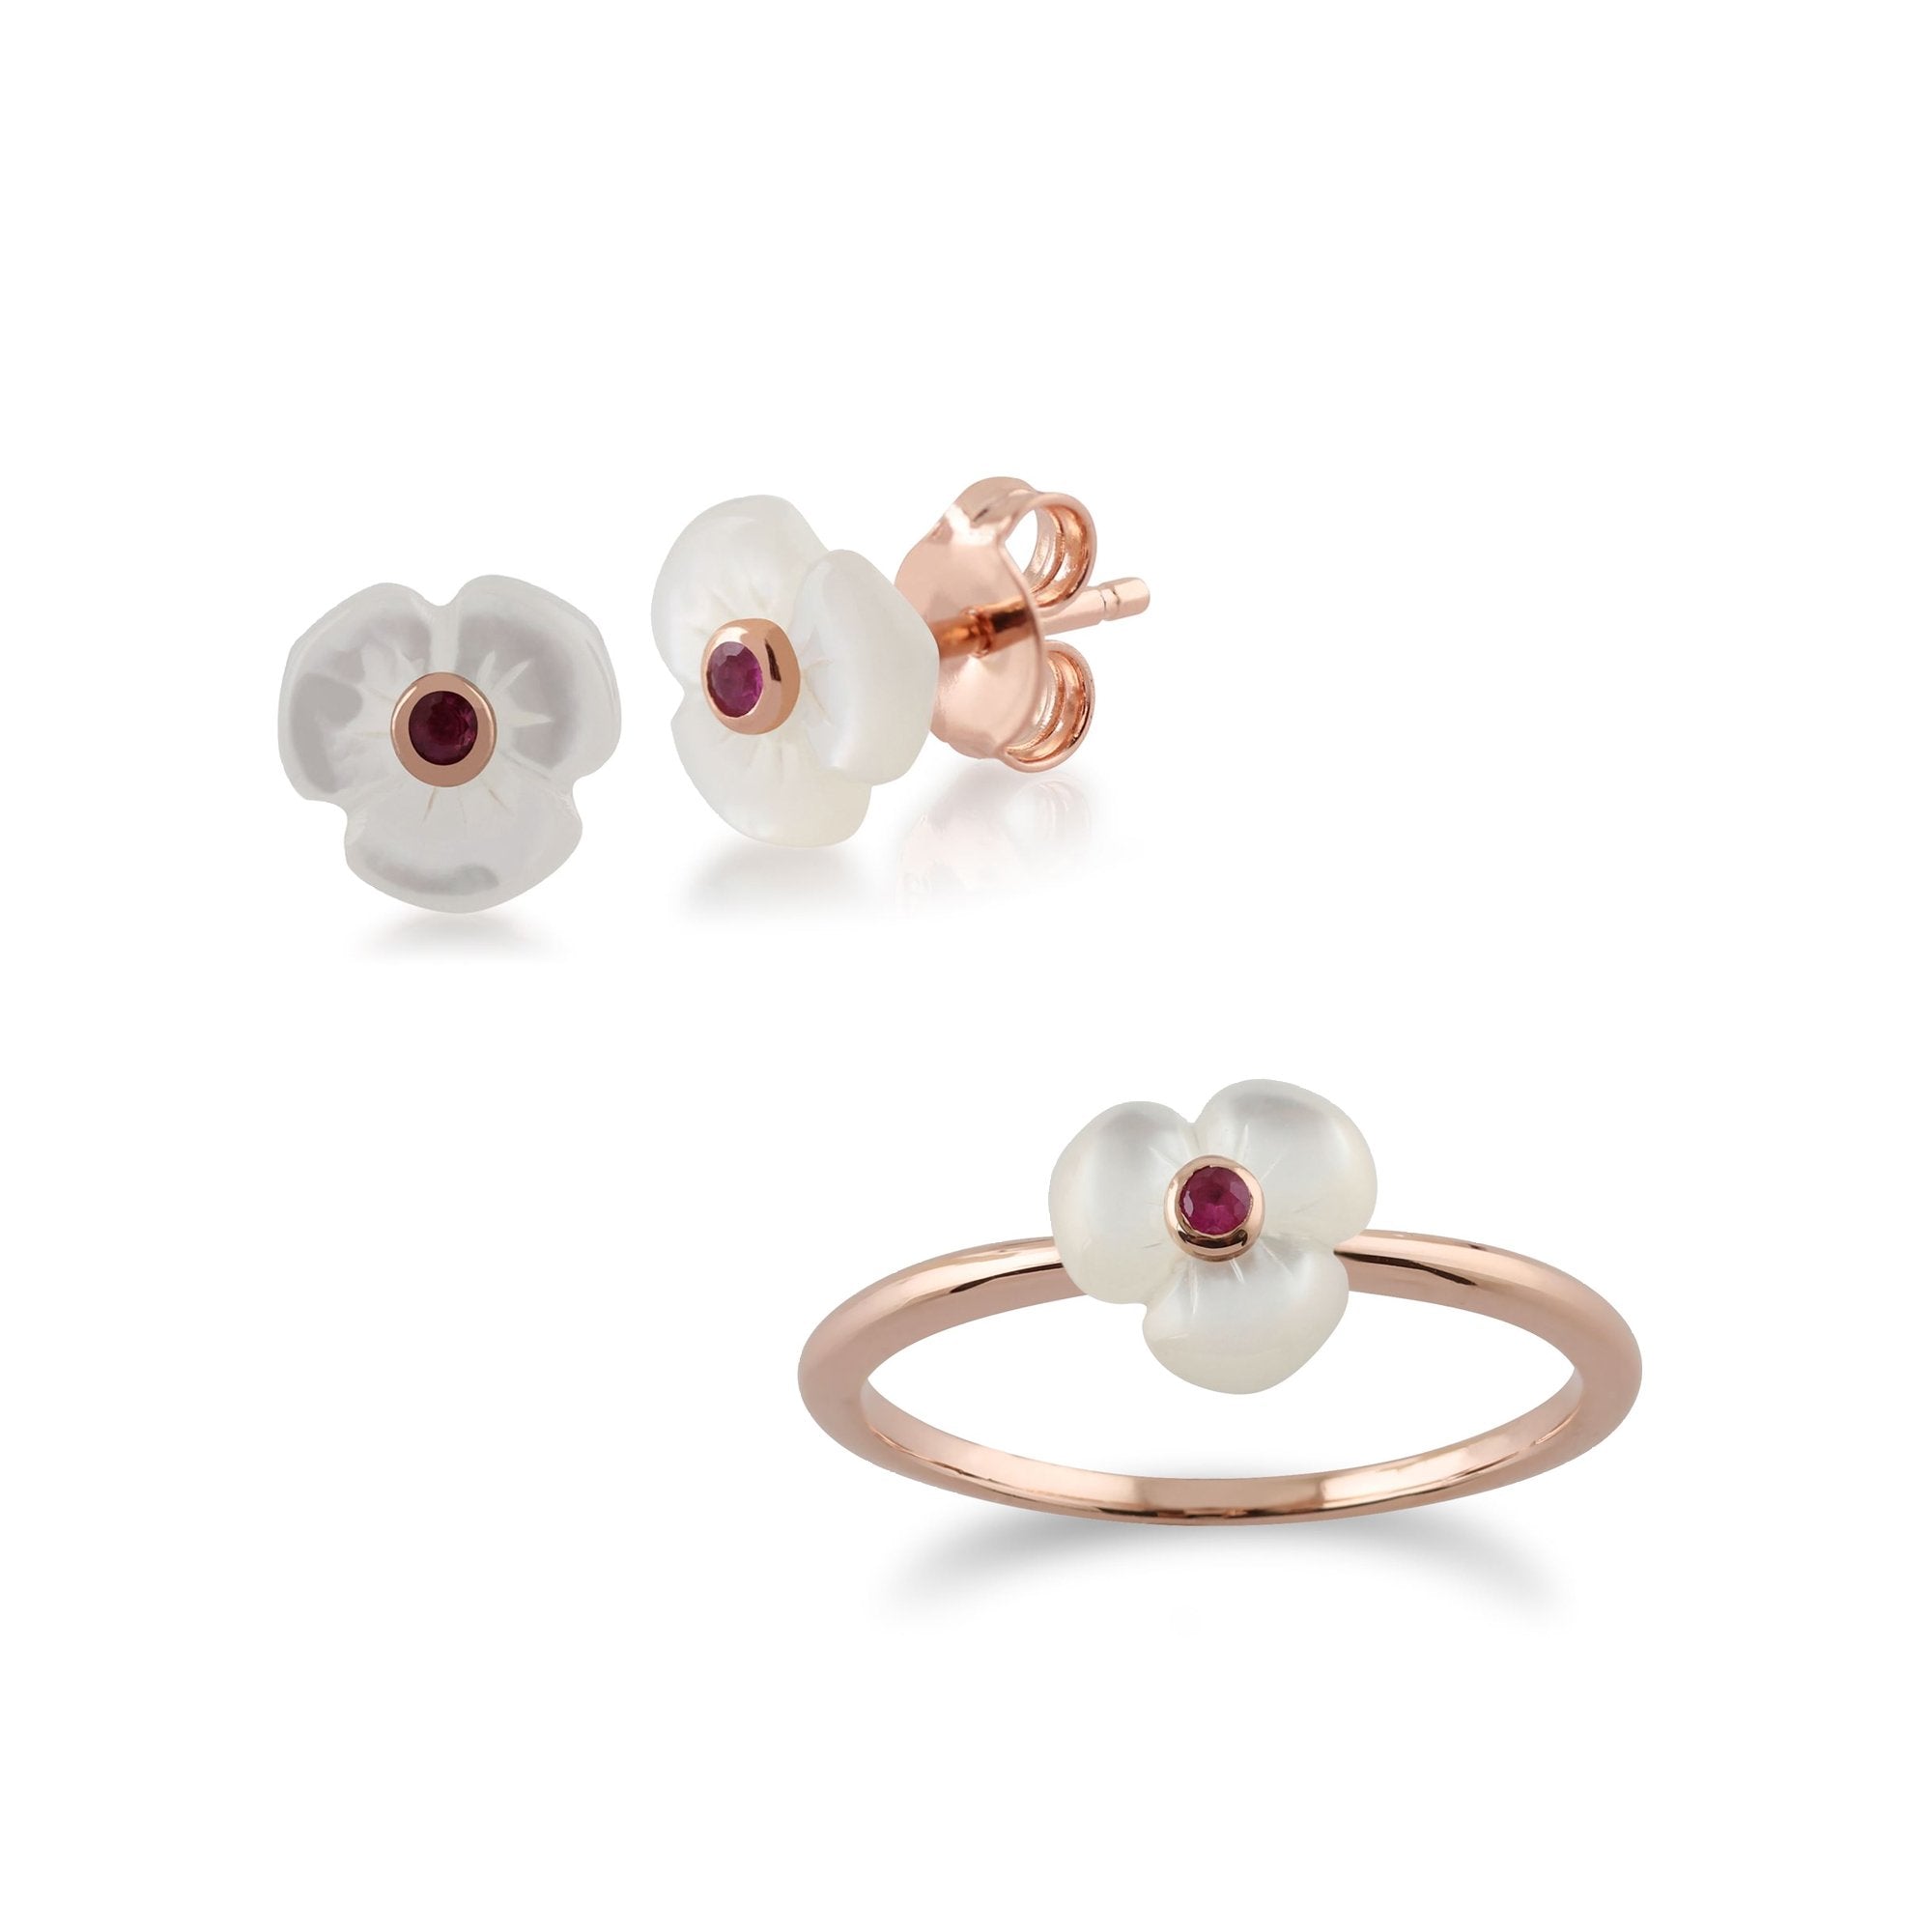 Floral Round Ruby & Mother of Pearl Poppy Stud Earrings & Ring Set in Rose Gold Plated 925 Sterling Silver